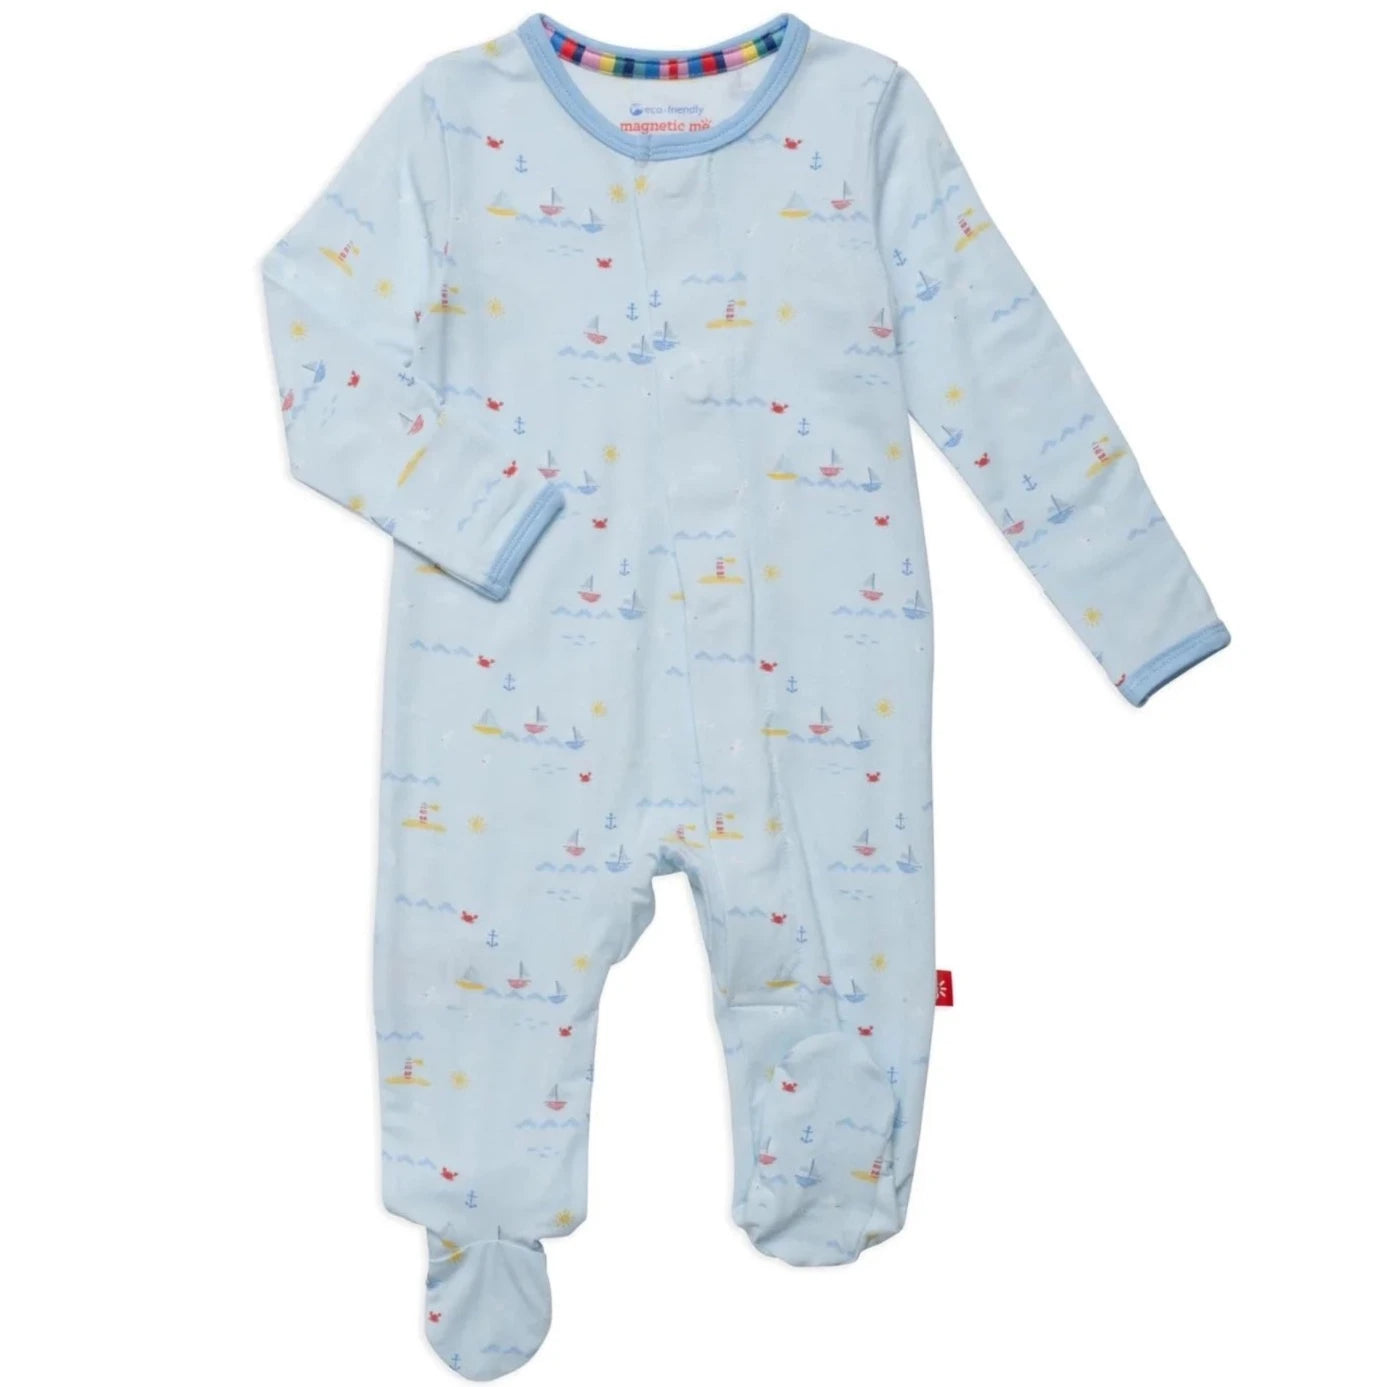 Blue long sleeve baby onesie with sailboats on it